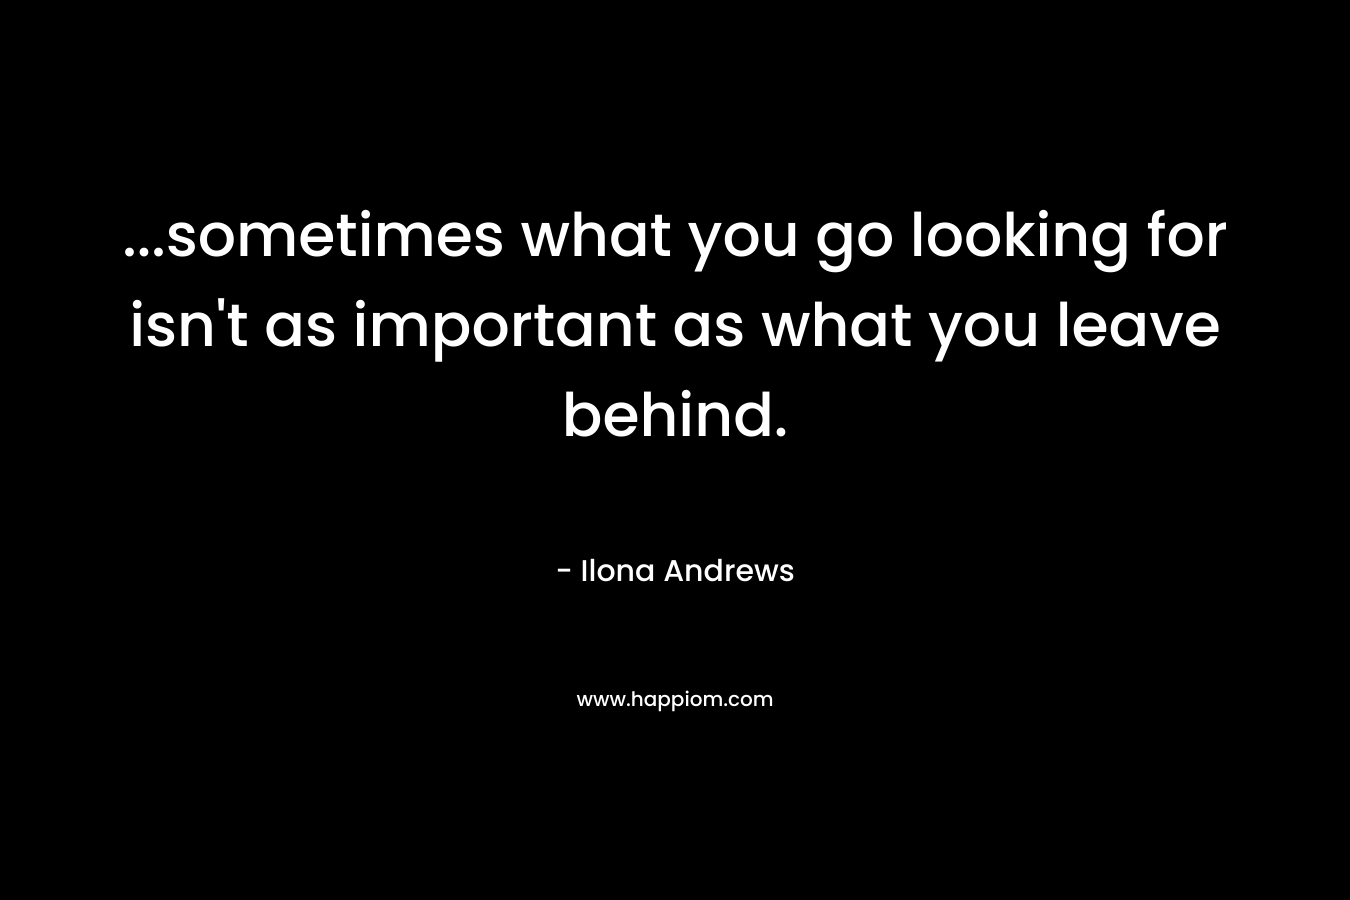 ...sometimes what you go looking for isn't as important as what you leave behind.